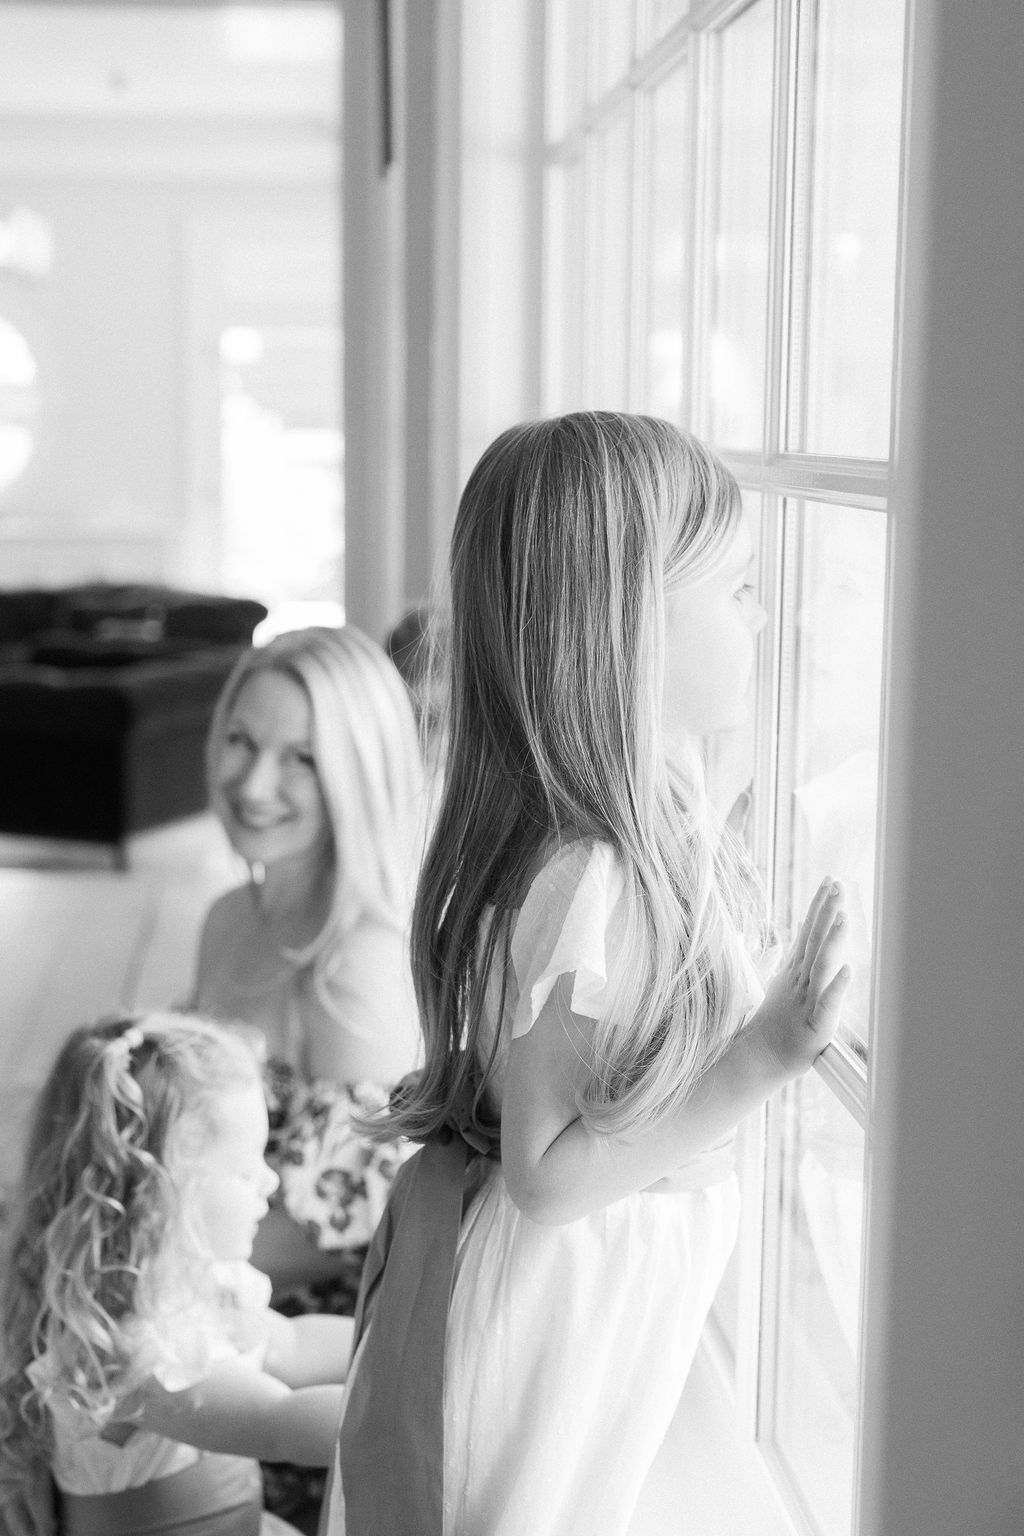 A toddler girl looks out a window while mom and her little sister sit beside her